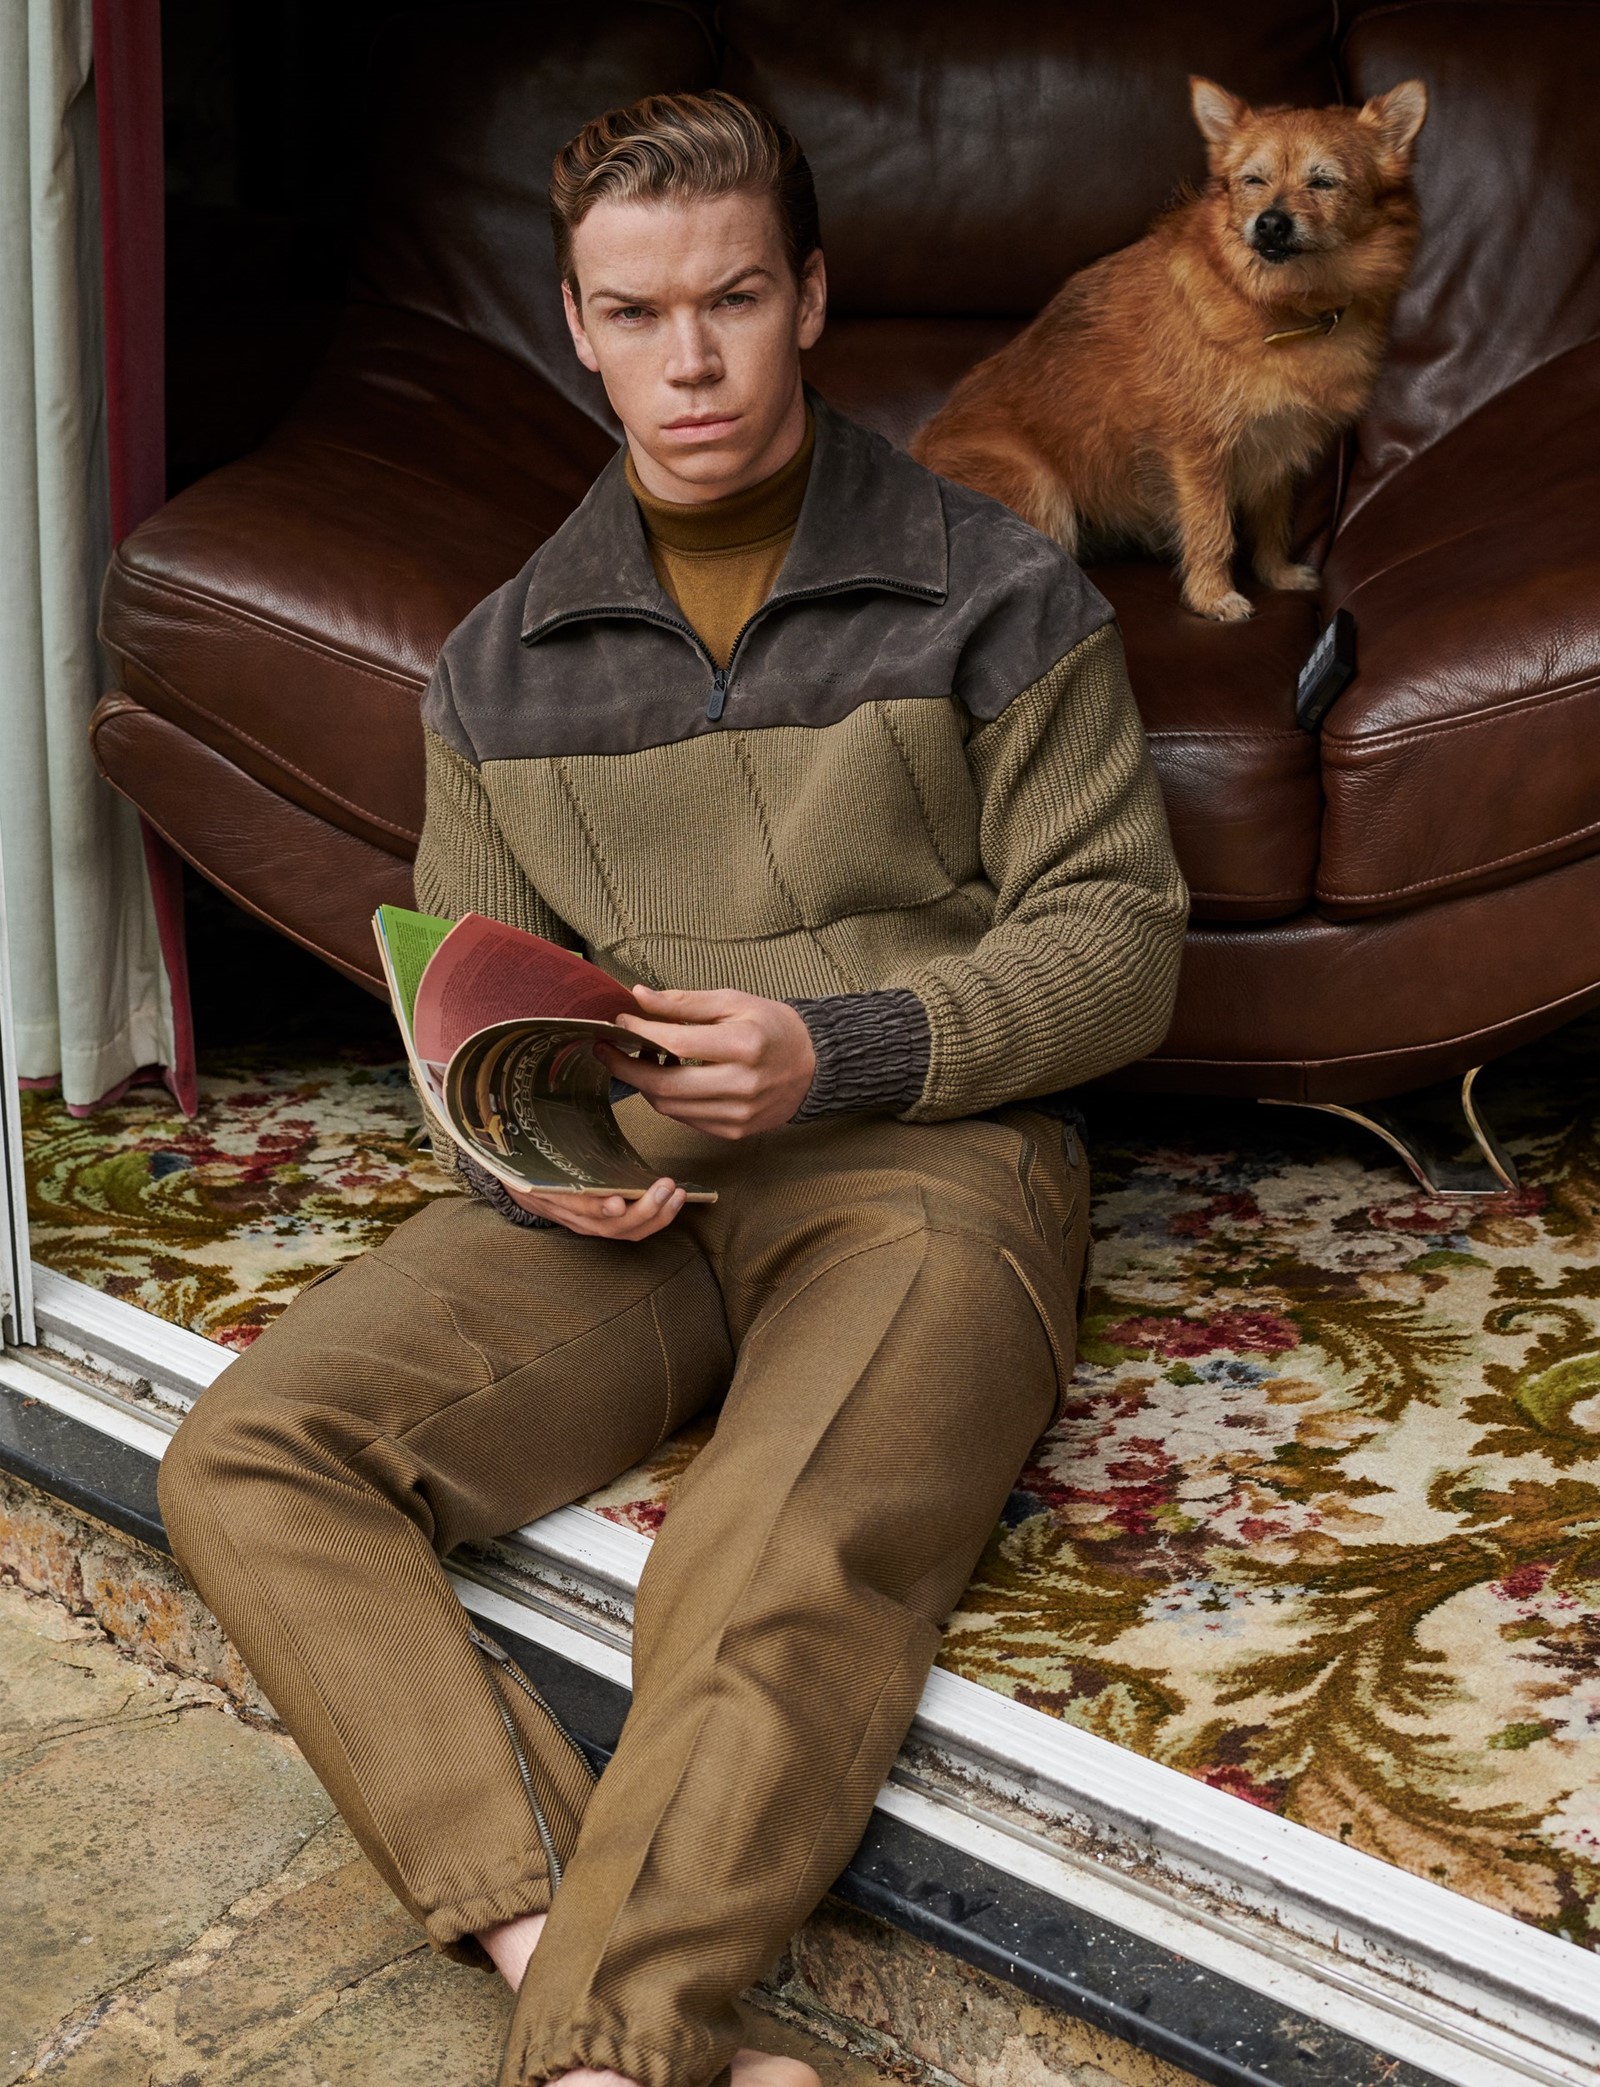 Will Poulter 3